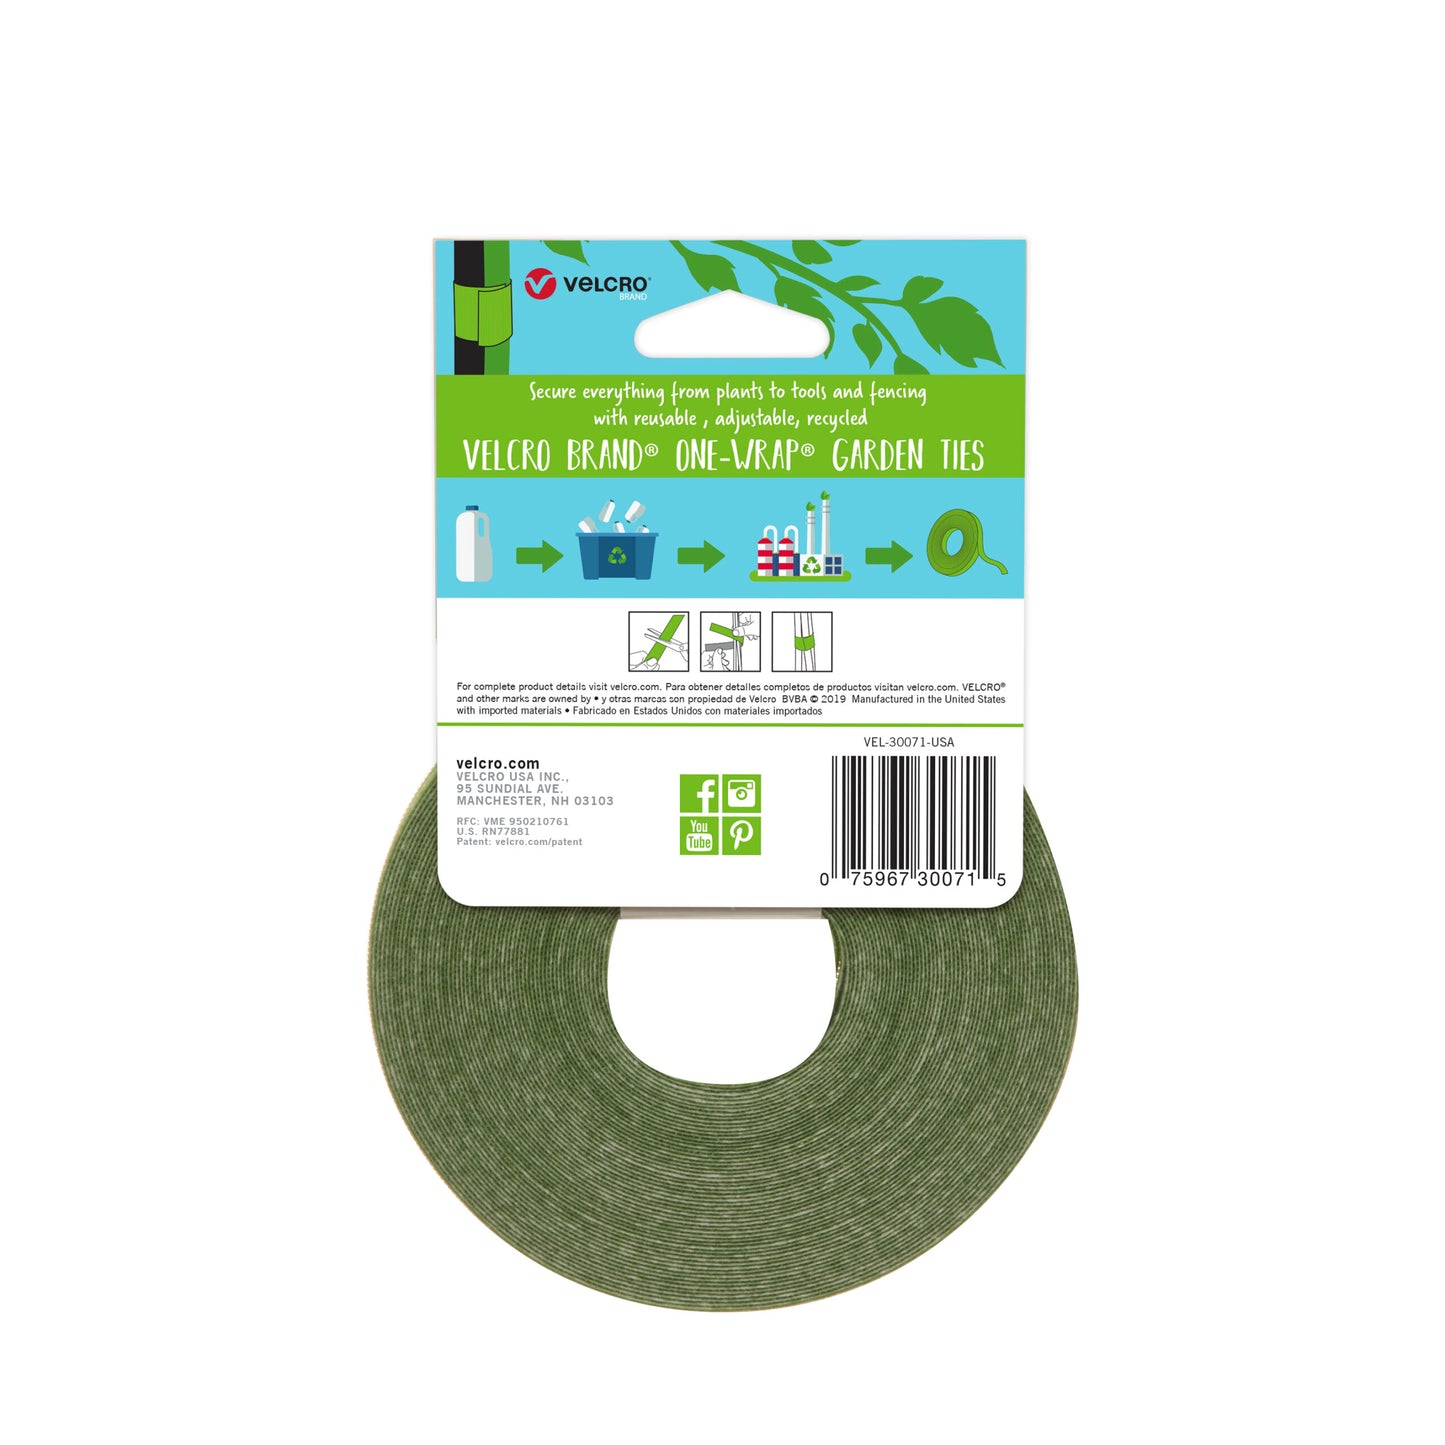 VELCRO® Brand ONE-WRAP® Garden Ties are made in the US from 65% recycled plastic.